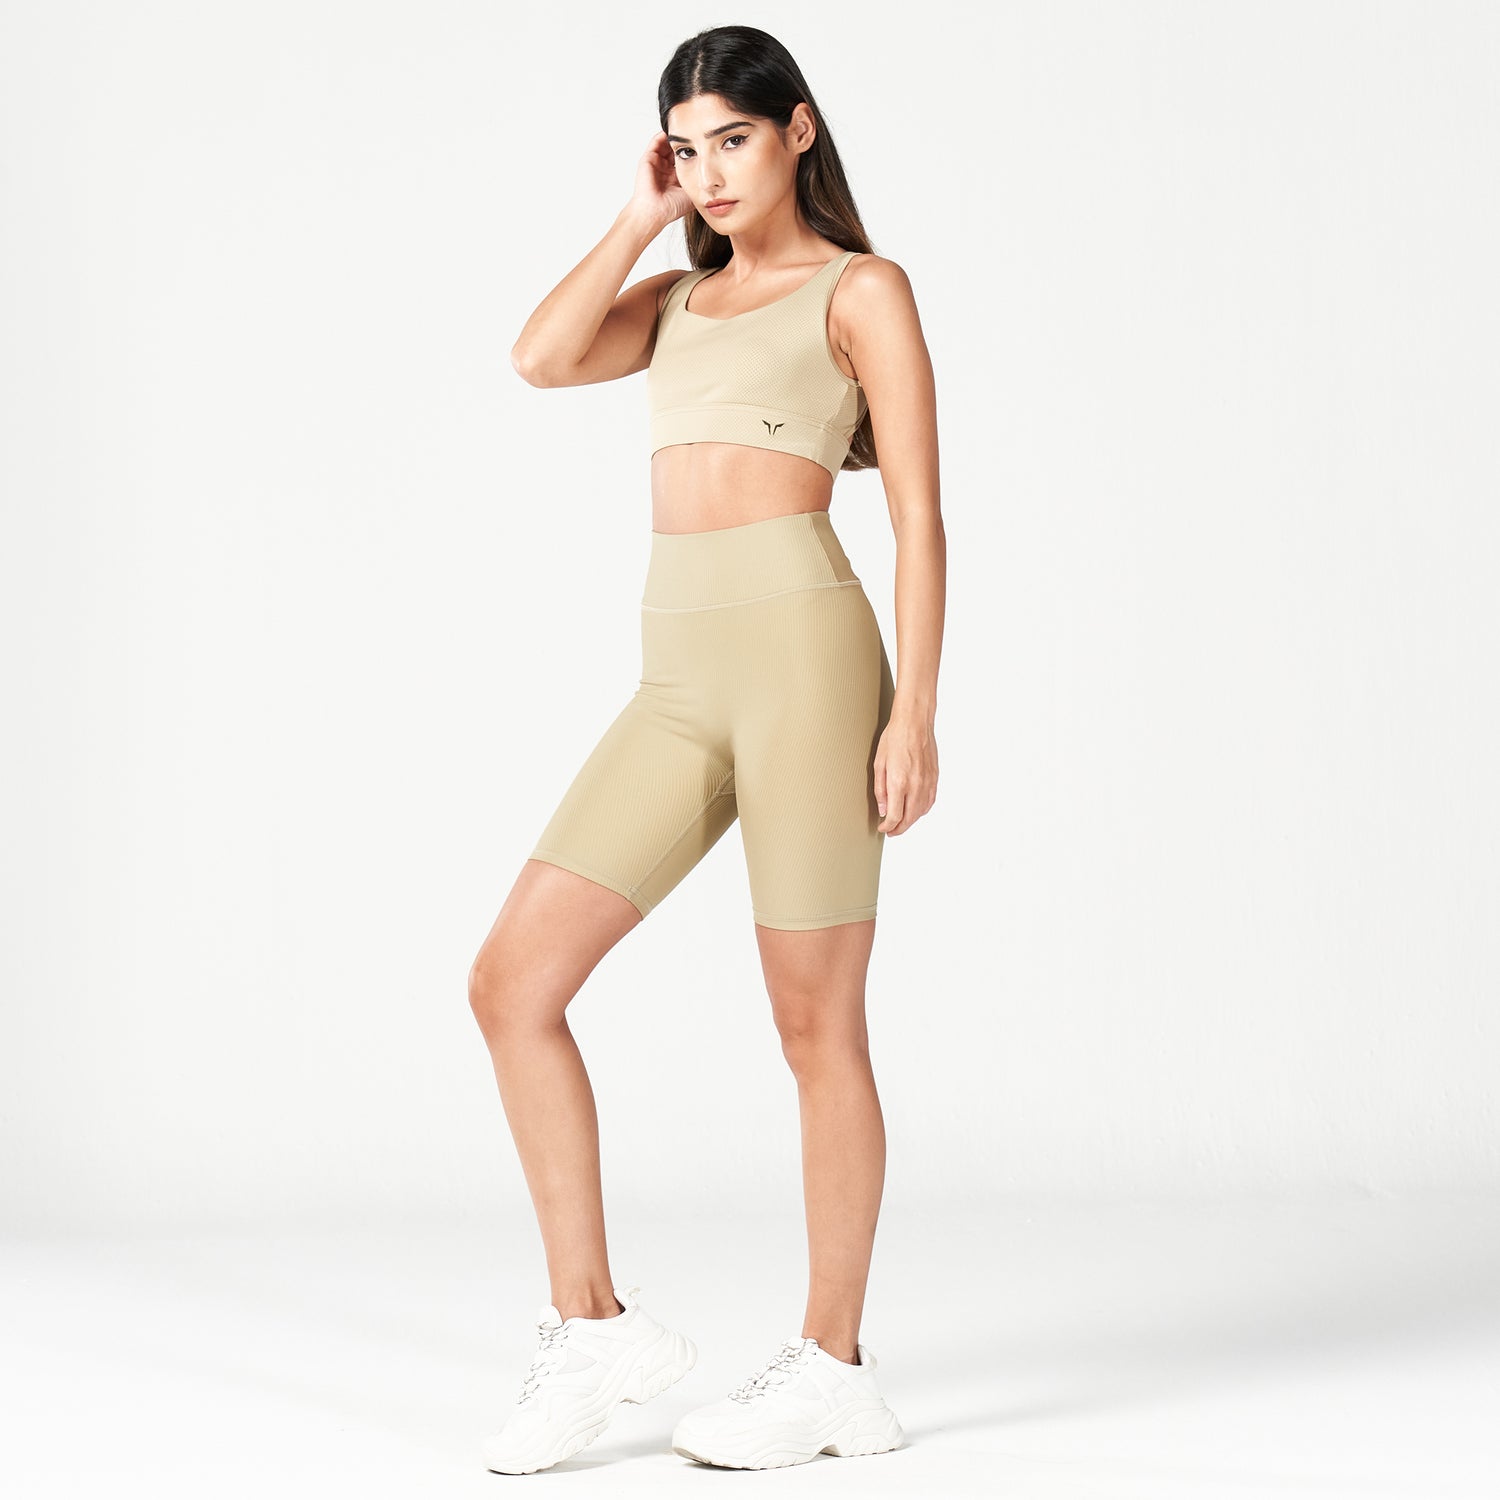 squatwolf-workout-clothes-code-power-bra-sand-sports-bra-for-gym